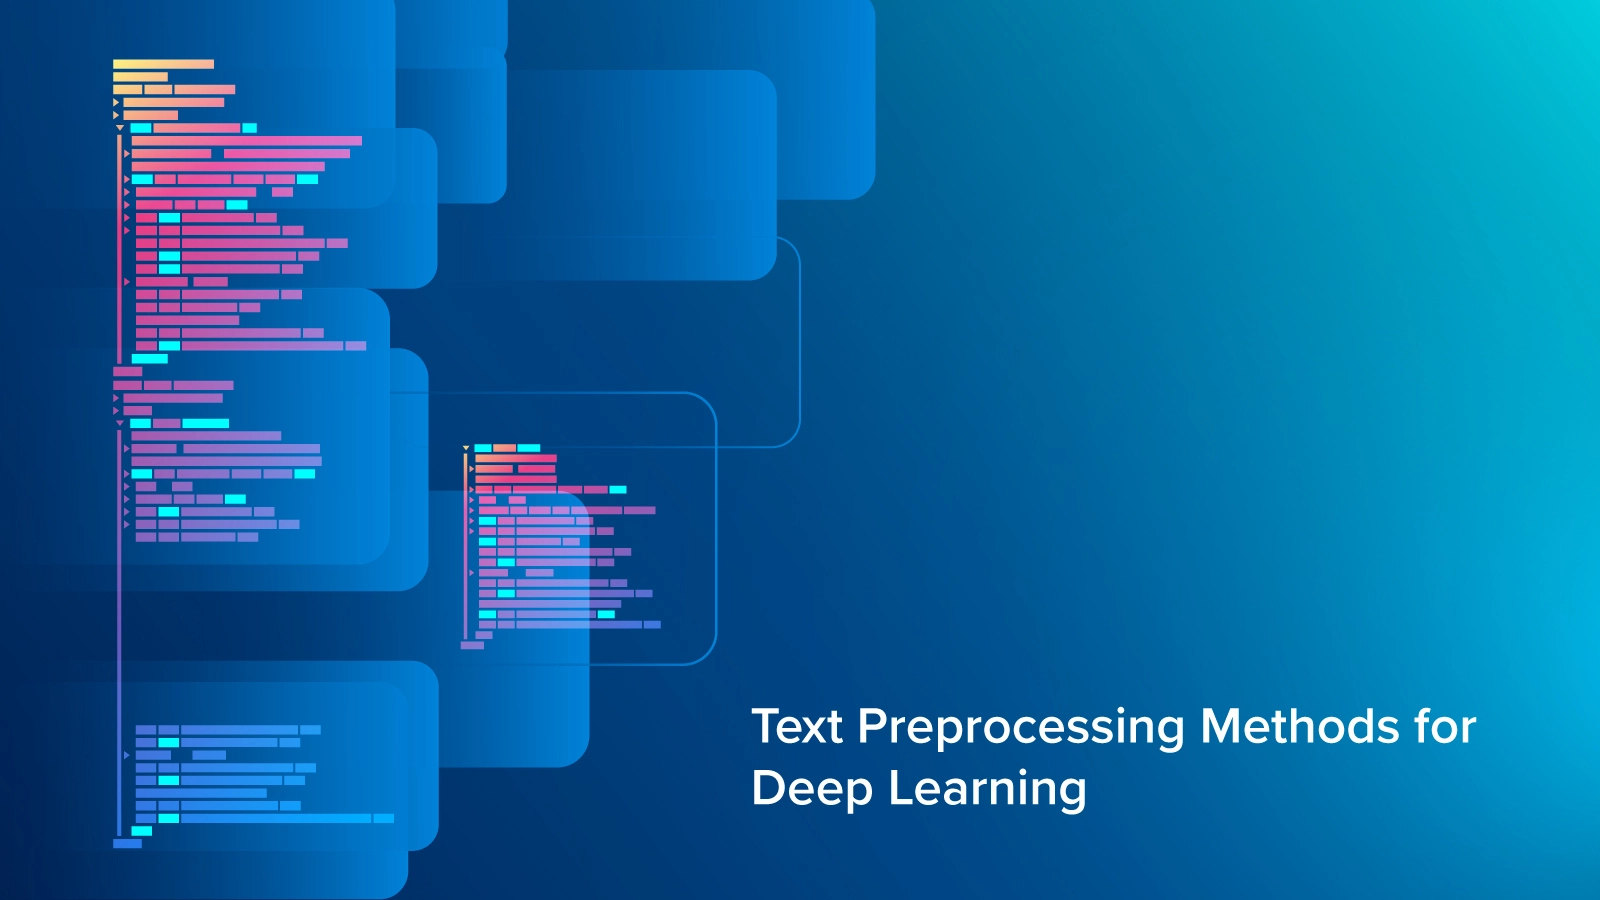 Text-Preprocessing-Methods-for-Deep-Learning.jpg